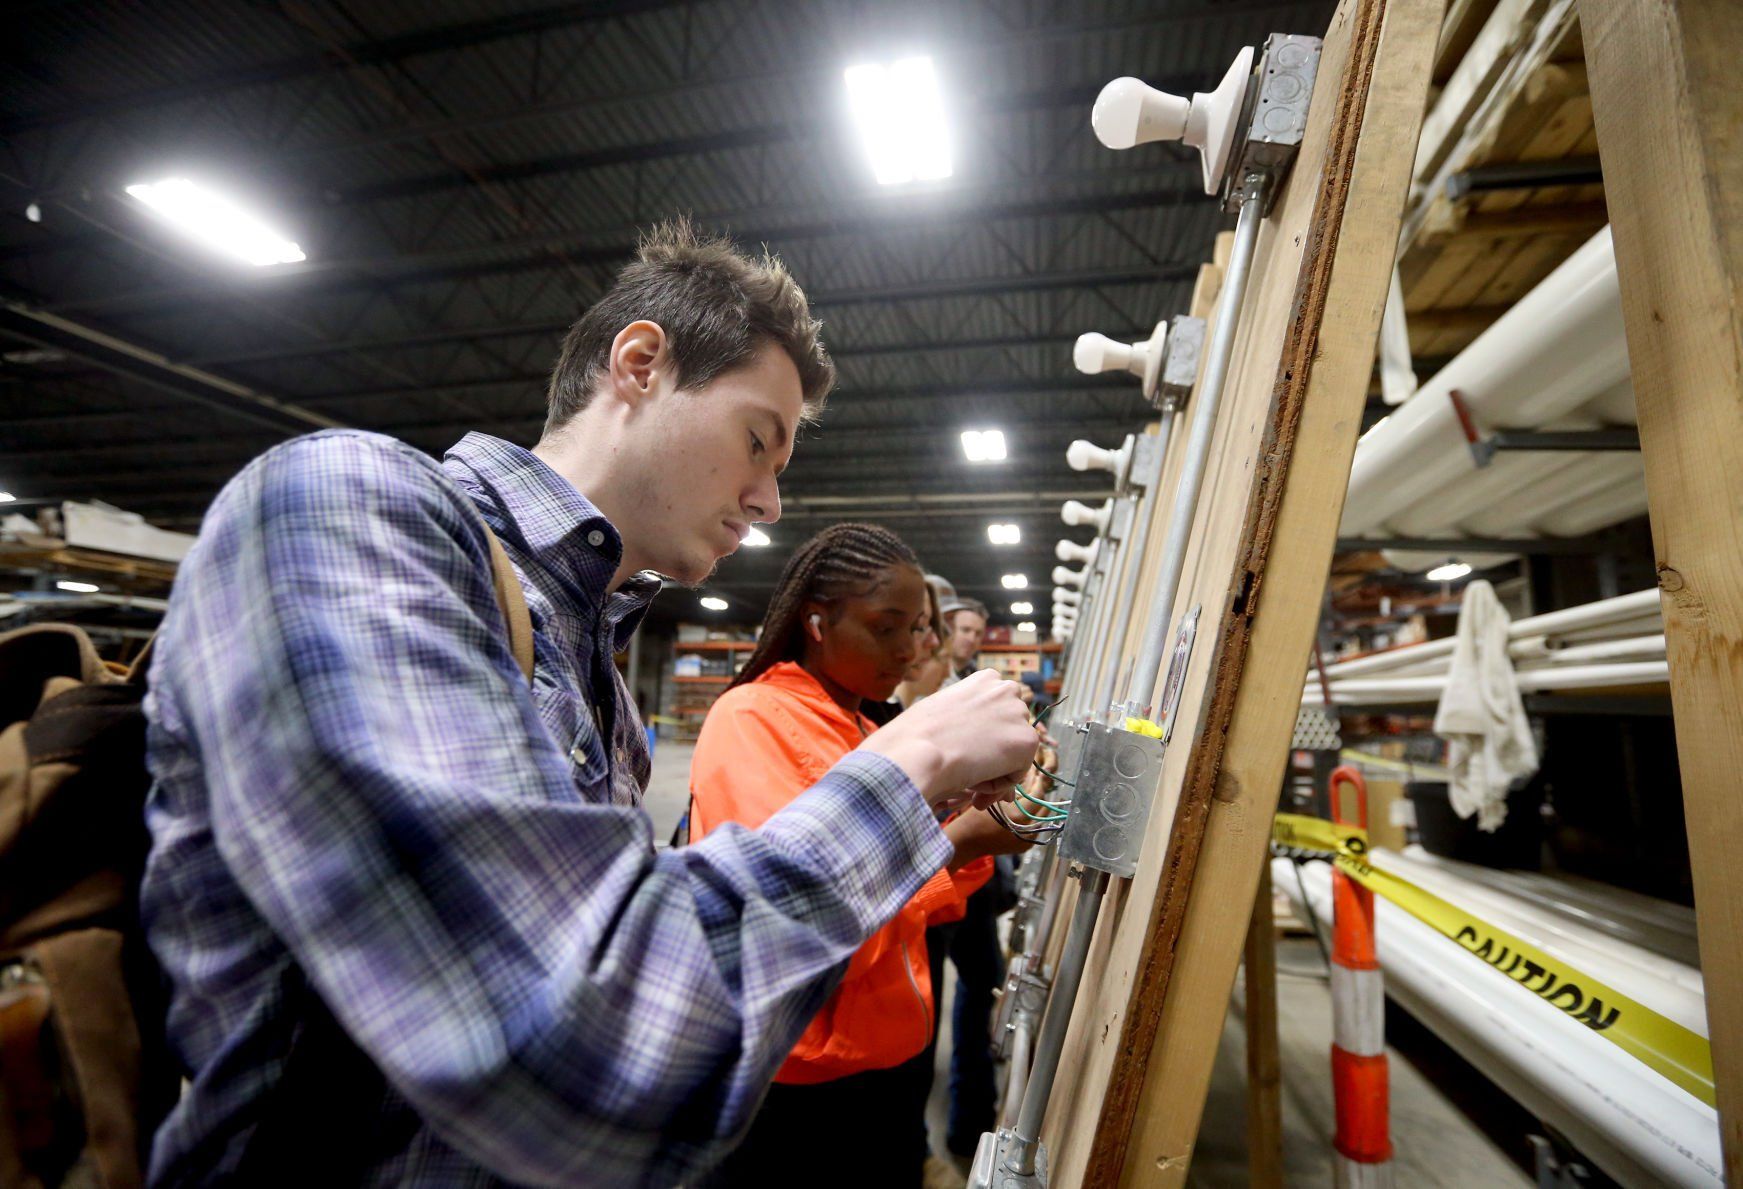 Grant Dinehart (left), a junior at Dubuque Senior High School, works to splice a junction box during the Construction Industry Career Expo at Portzen Construction in Dubuque on Thursday, April 28, 2022.    PHOTO CREDIT: JESSICA REILLY